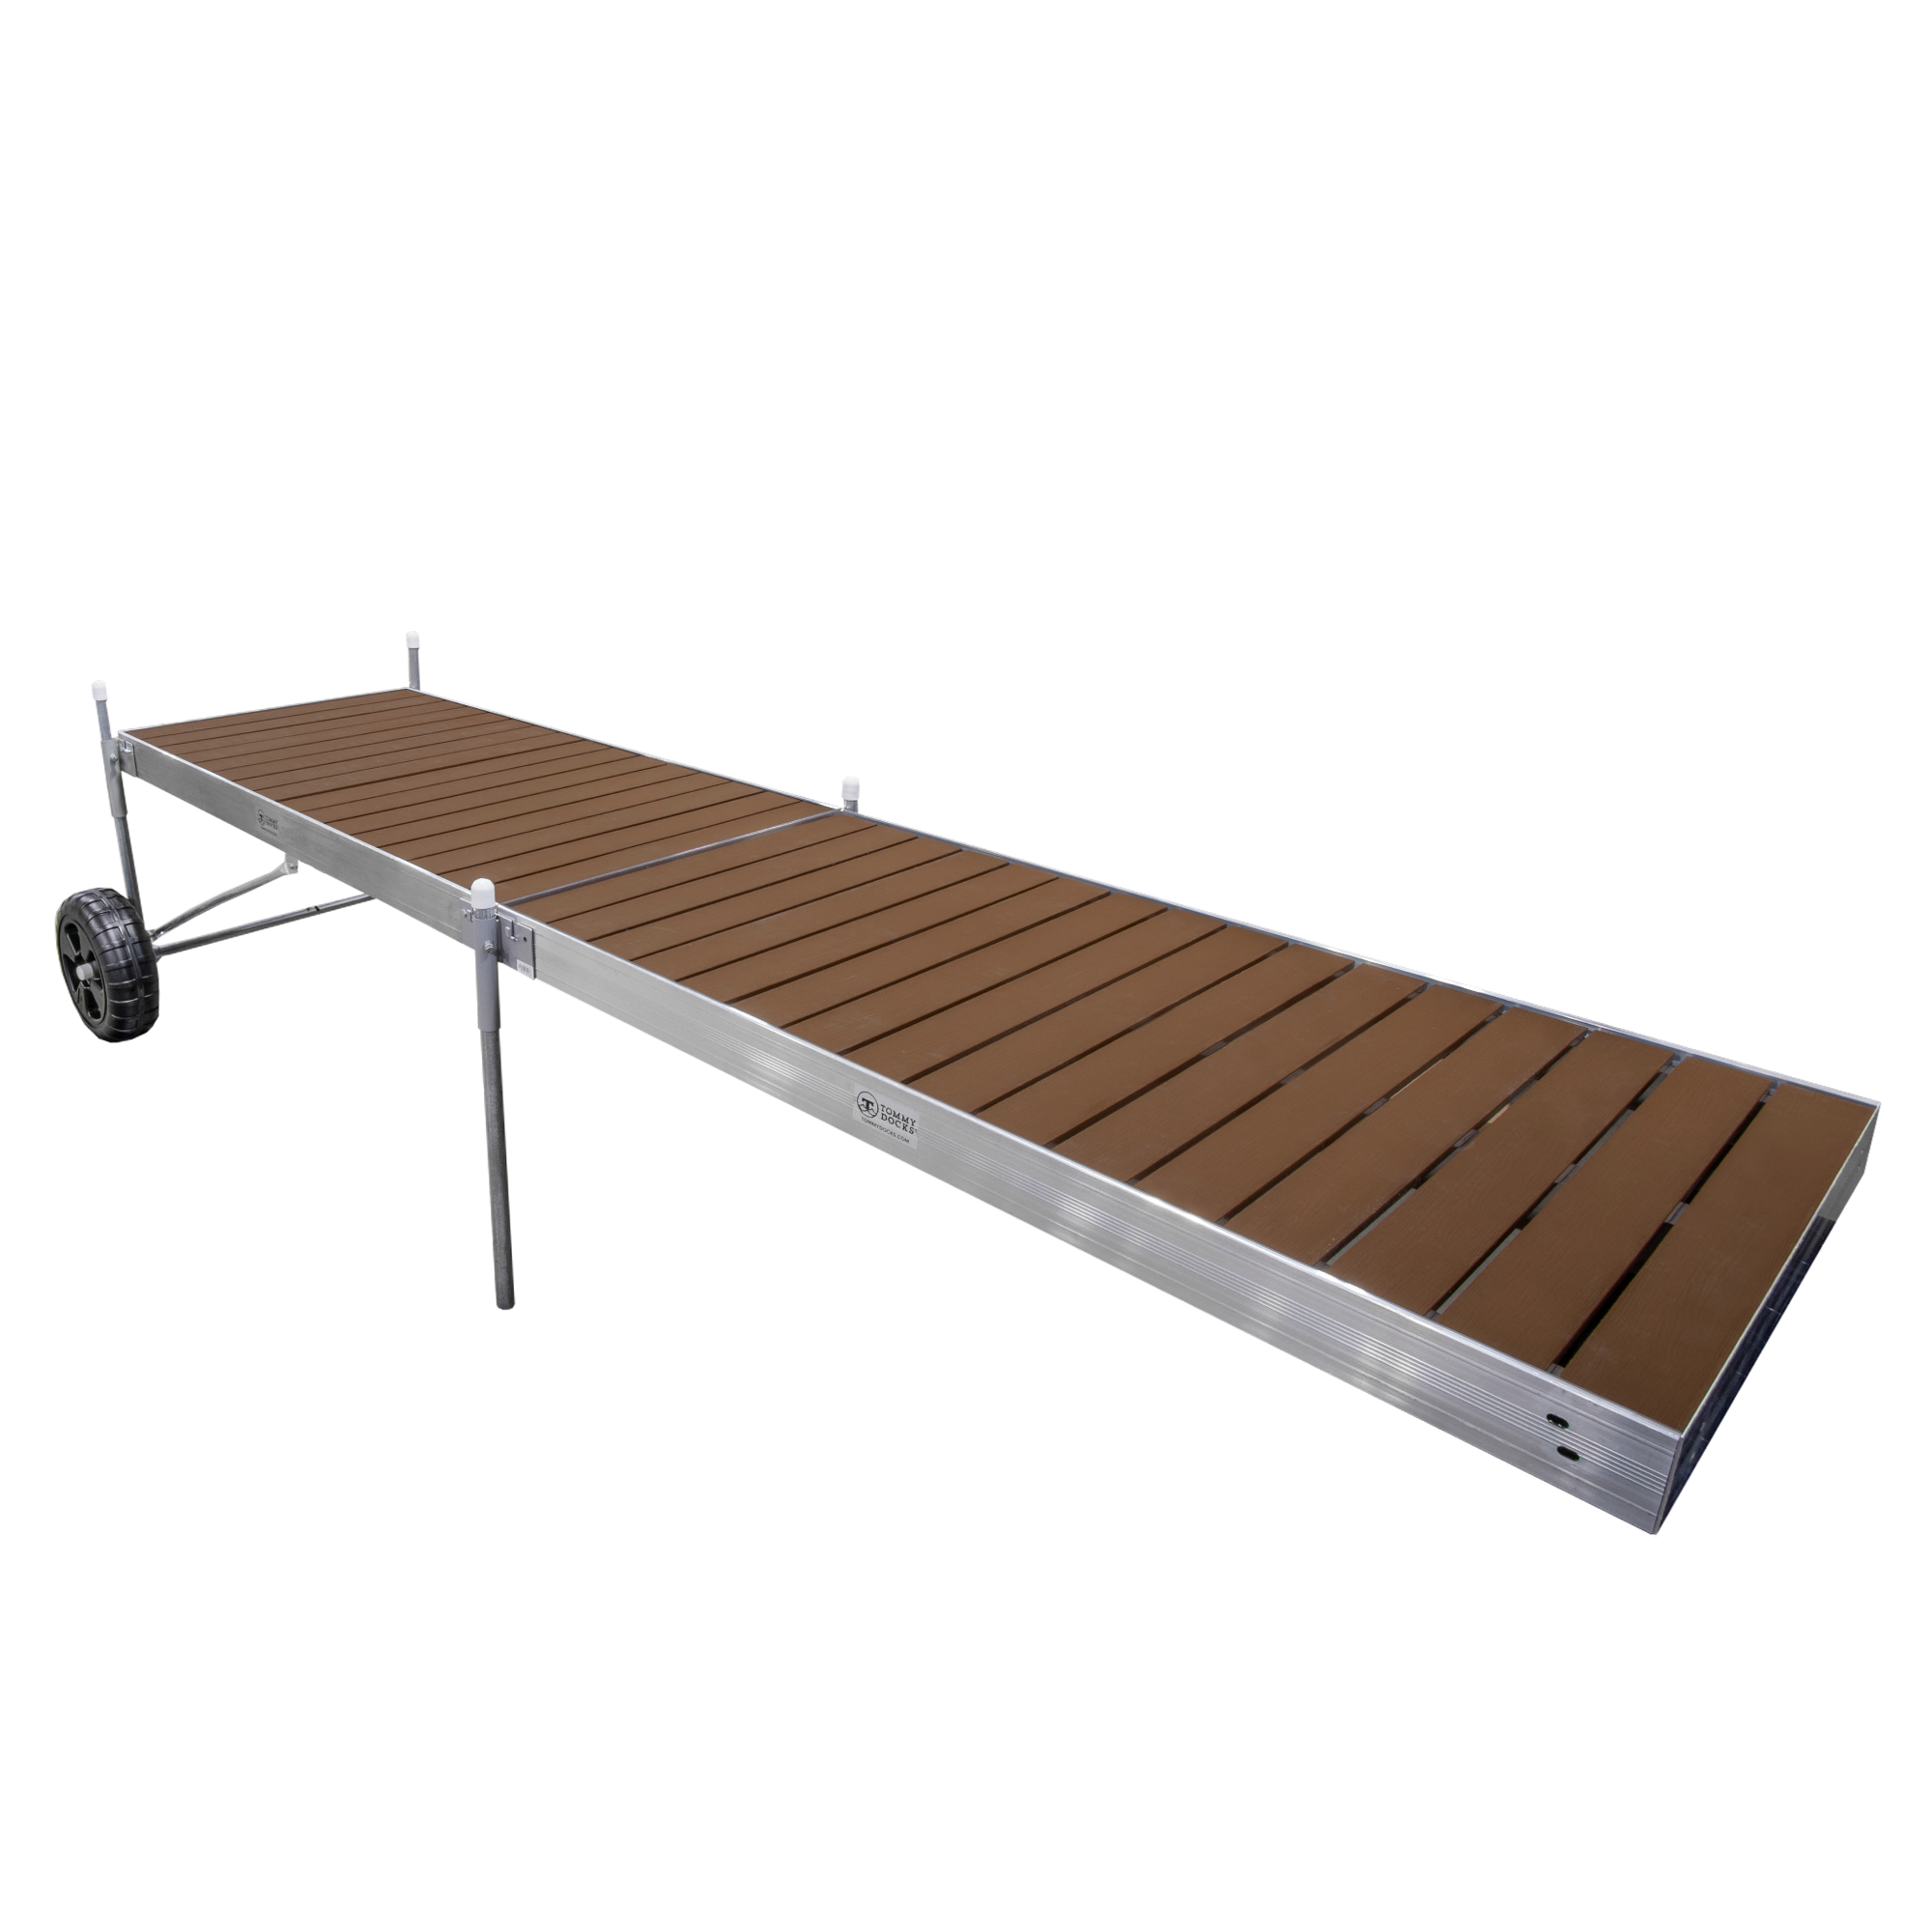 16' Roll-In-Dock Straight Aluminum Frame with Composite Removable Decking Complete Dock Package - Woodland Brown